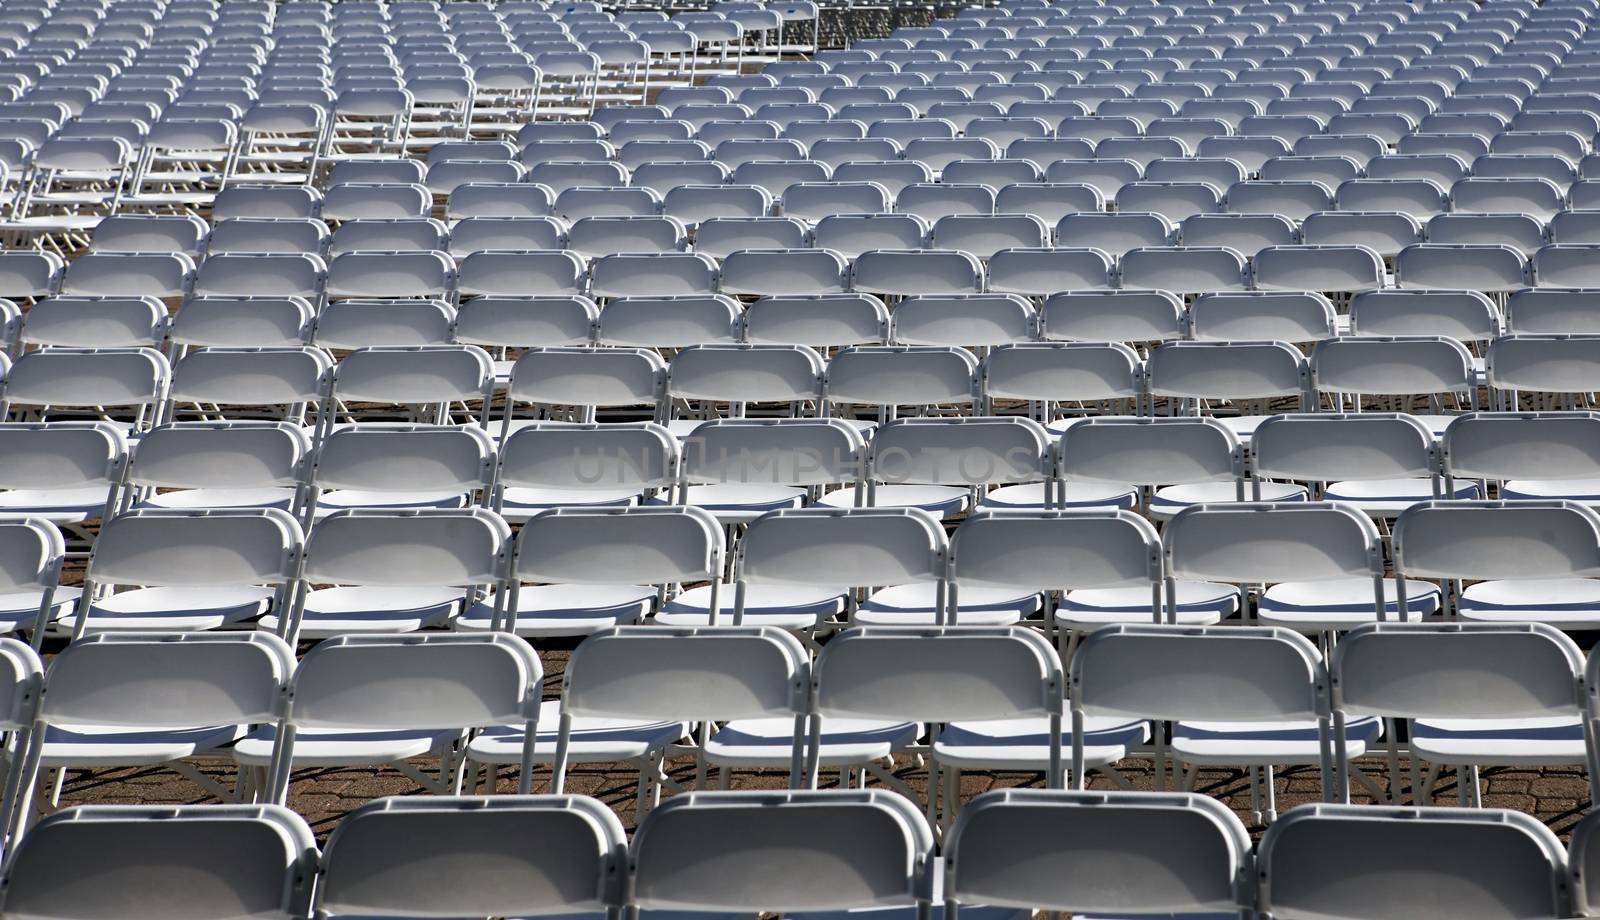 Lots of white chairs at the stadium